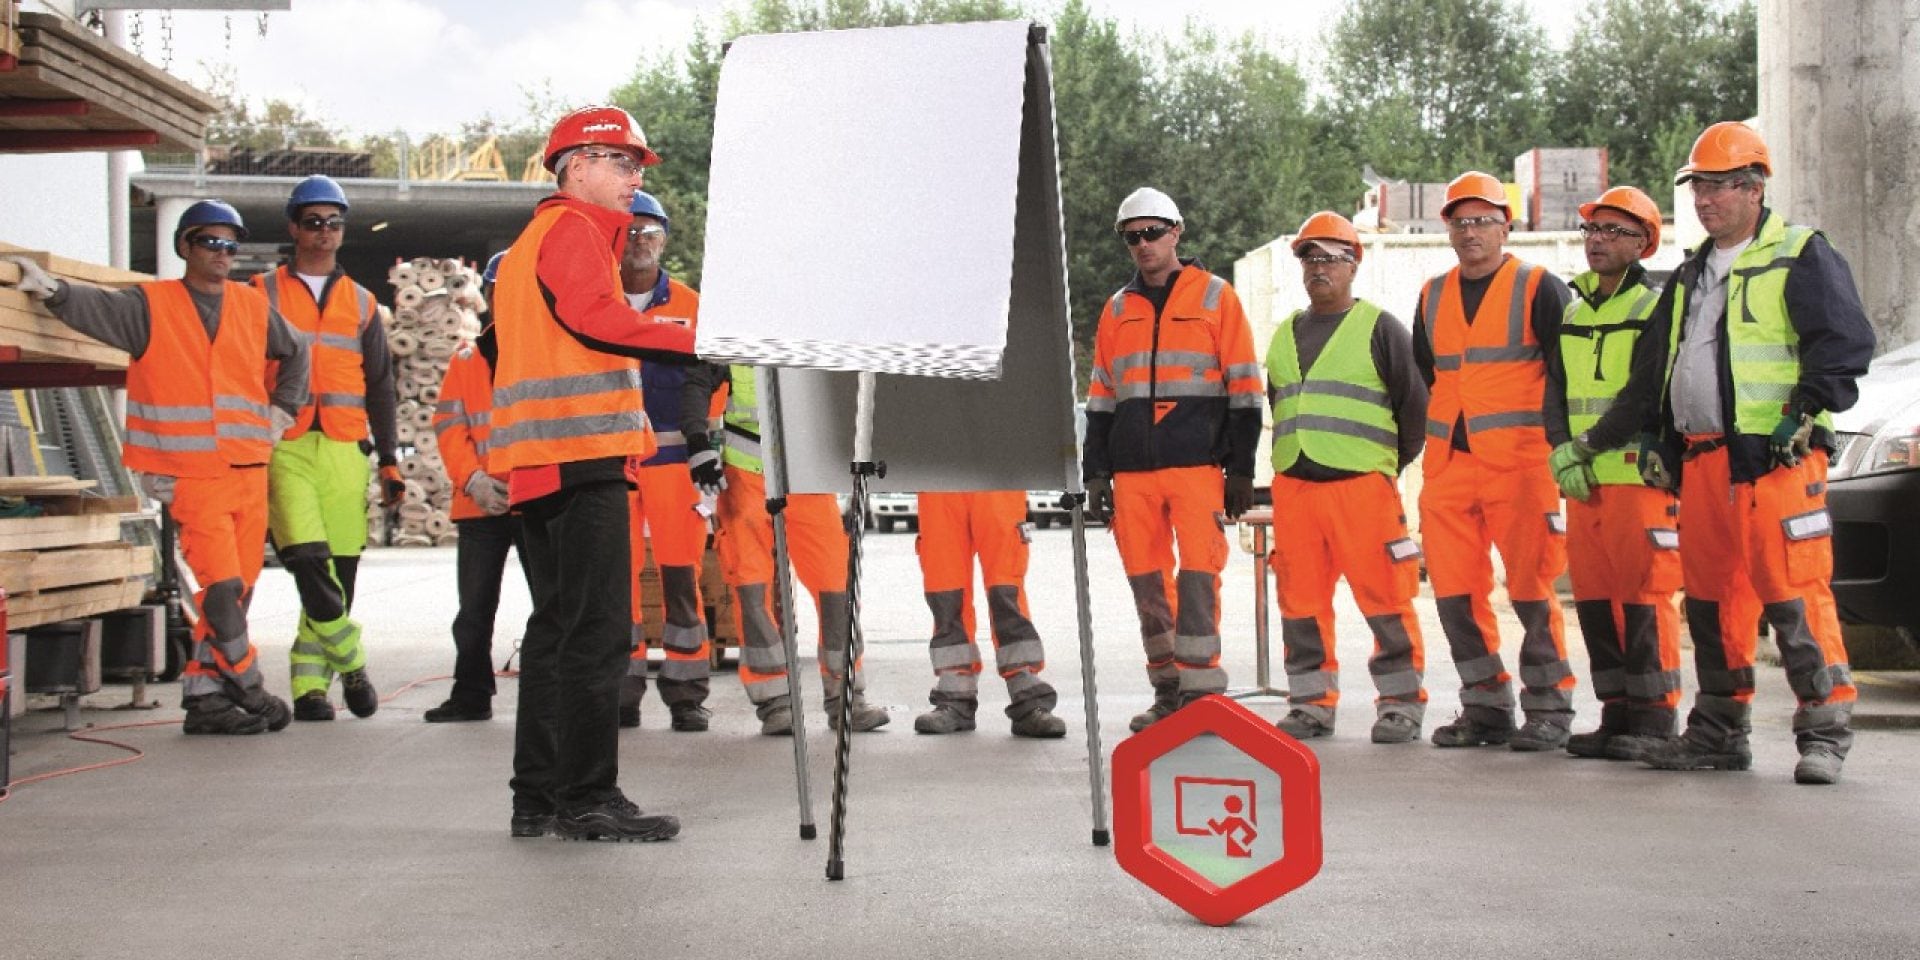 Find out how to prevent risk and injury  on construction sites, with Hilti’s training  for health and safety. Find out about  what to do in an emergency.